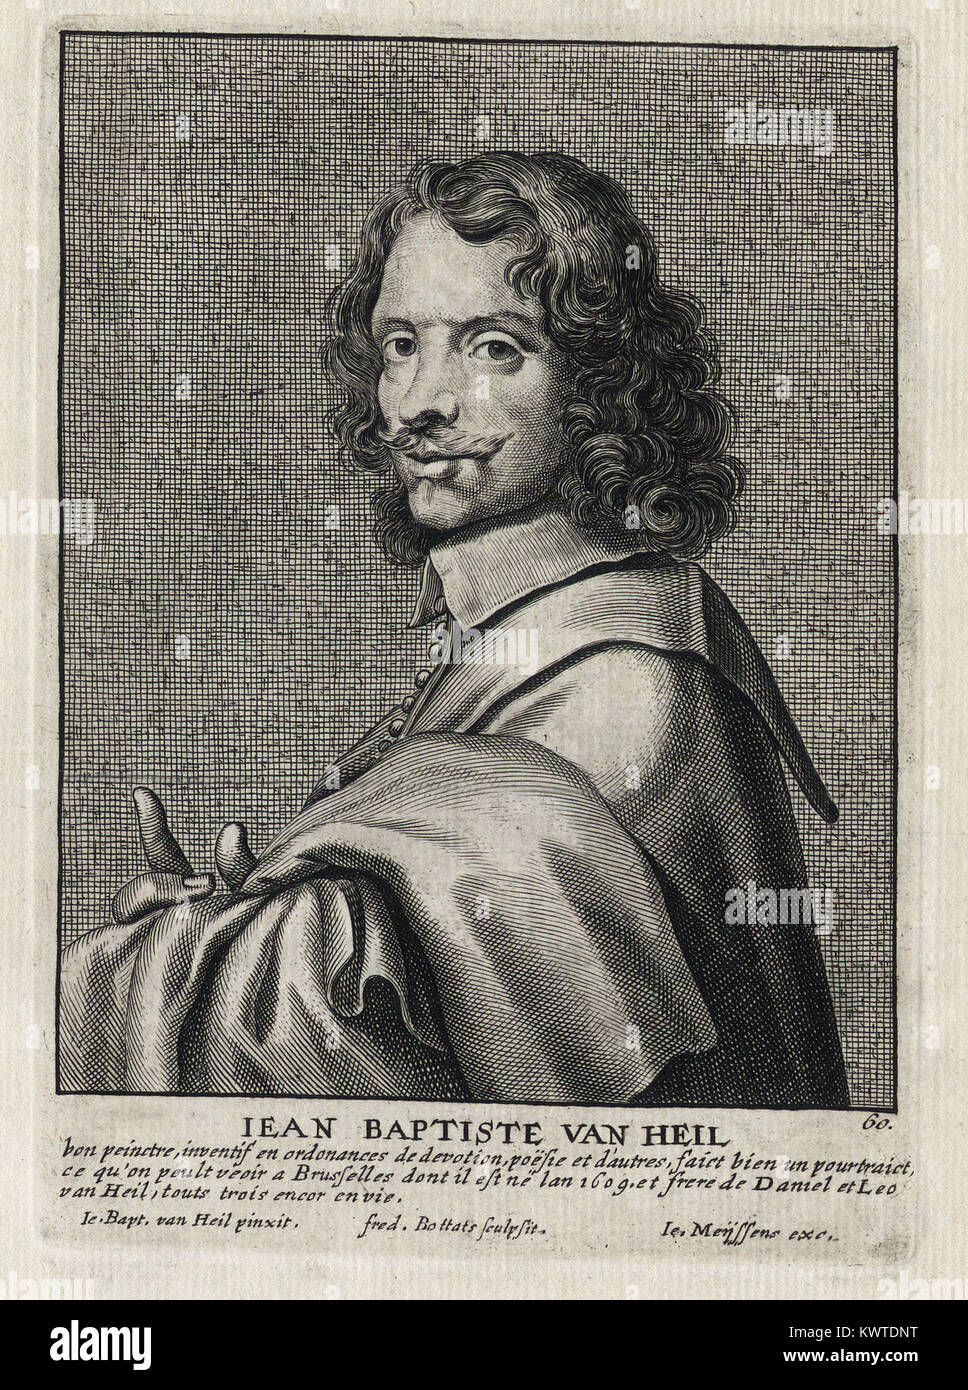 JEAN BAPTISTE VAN HEIL - Woodcut portrait and short biography (old french language) - Engraving 17th century Stock Photo